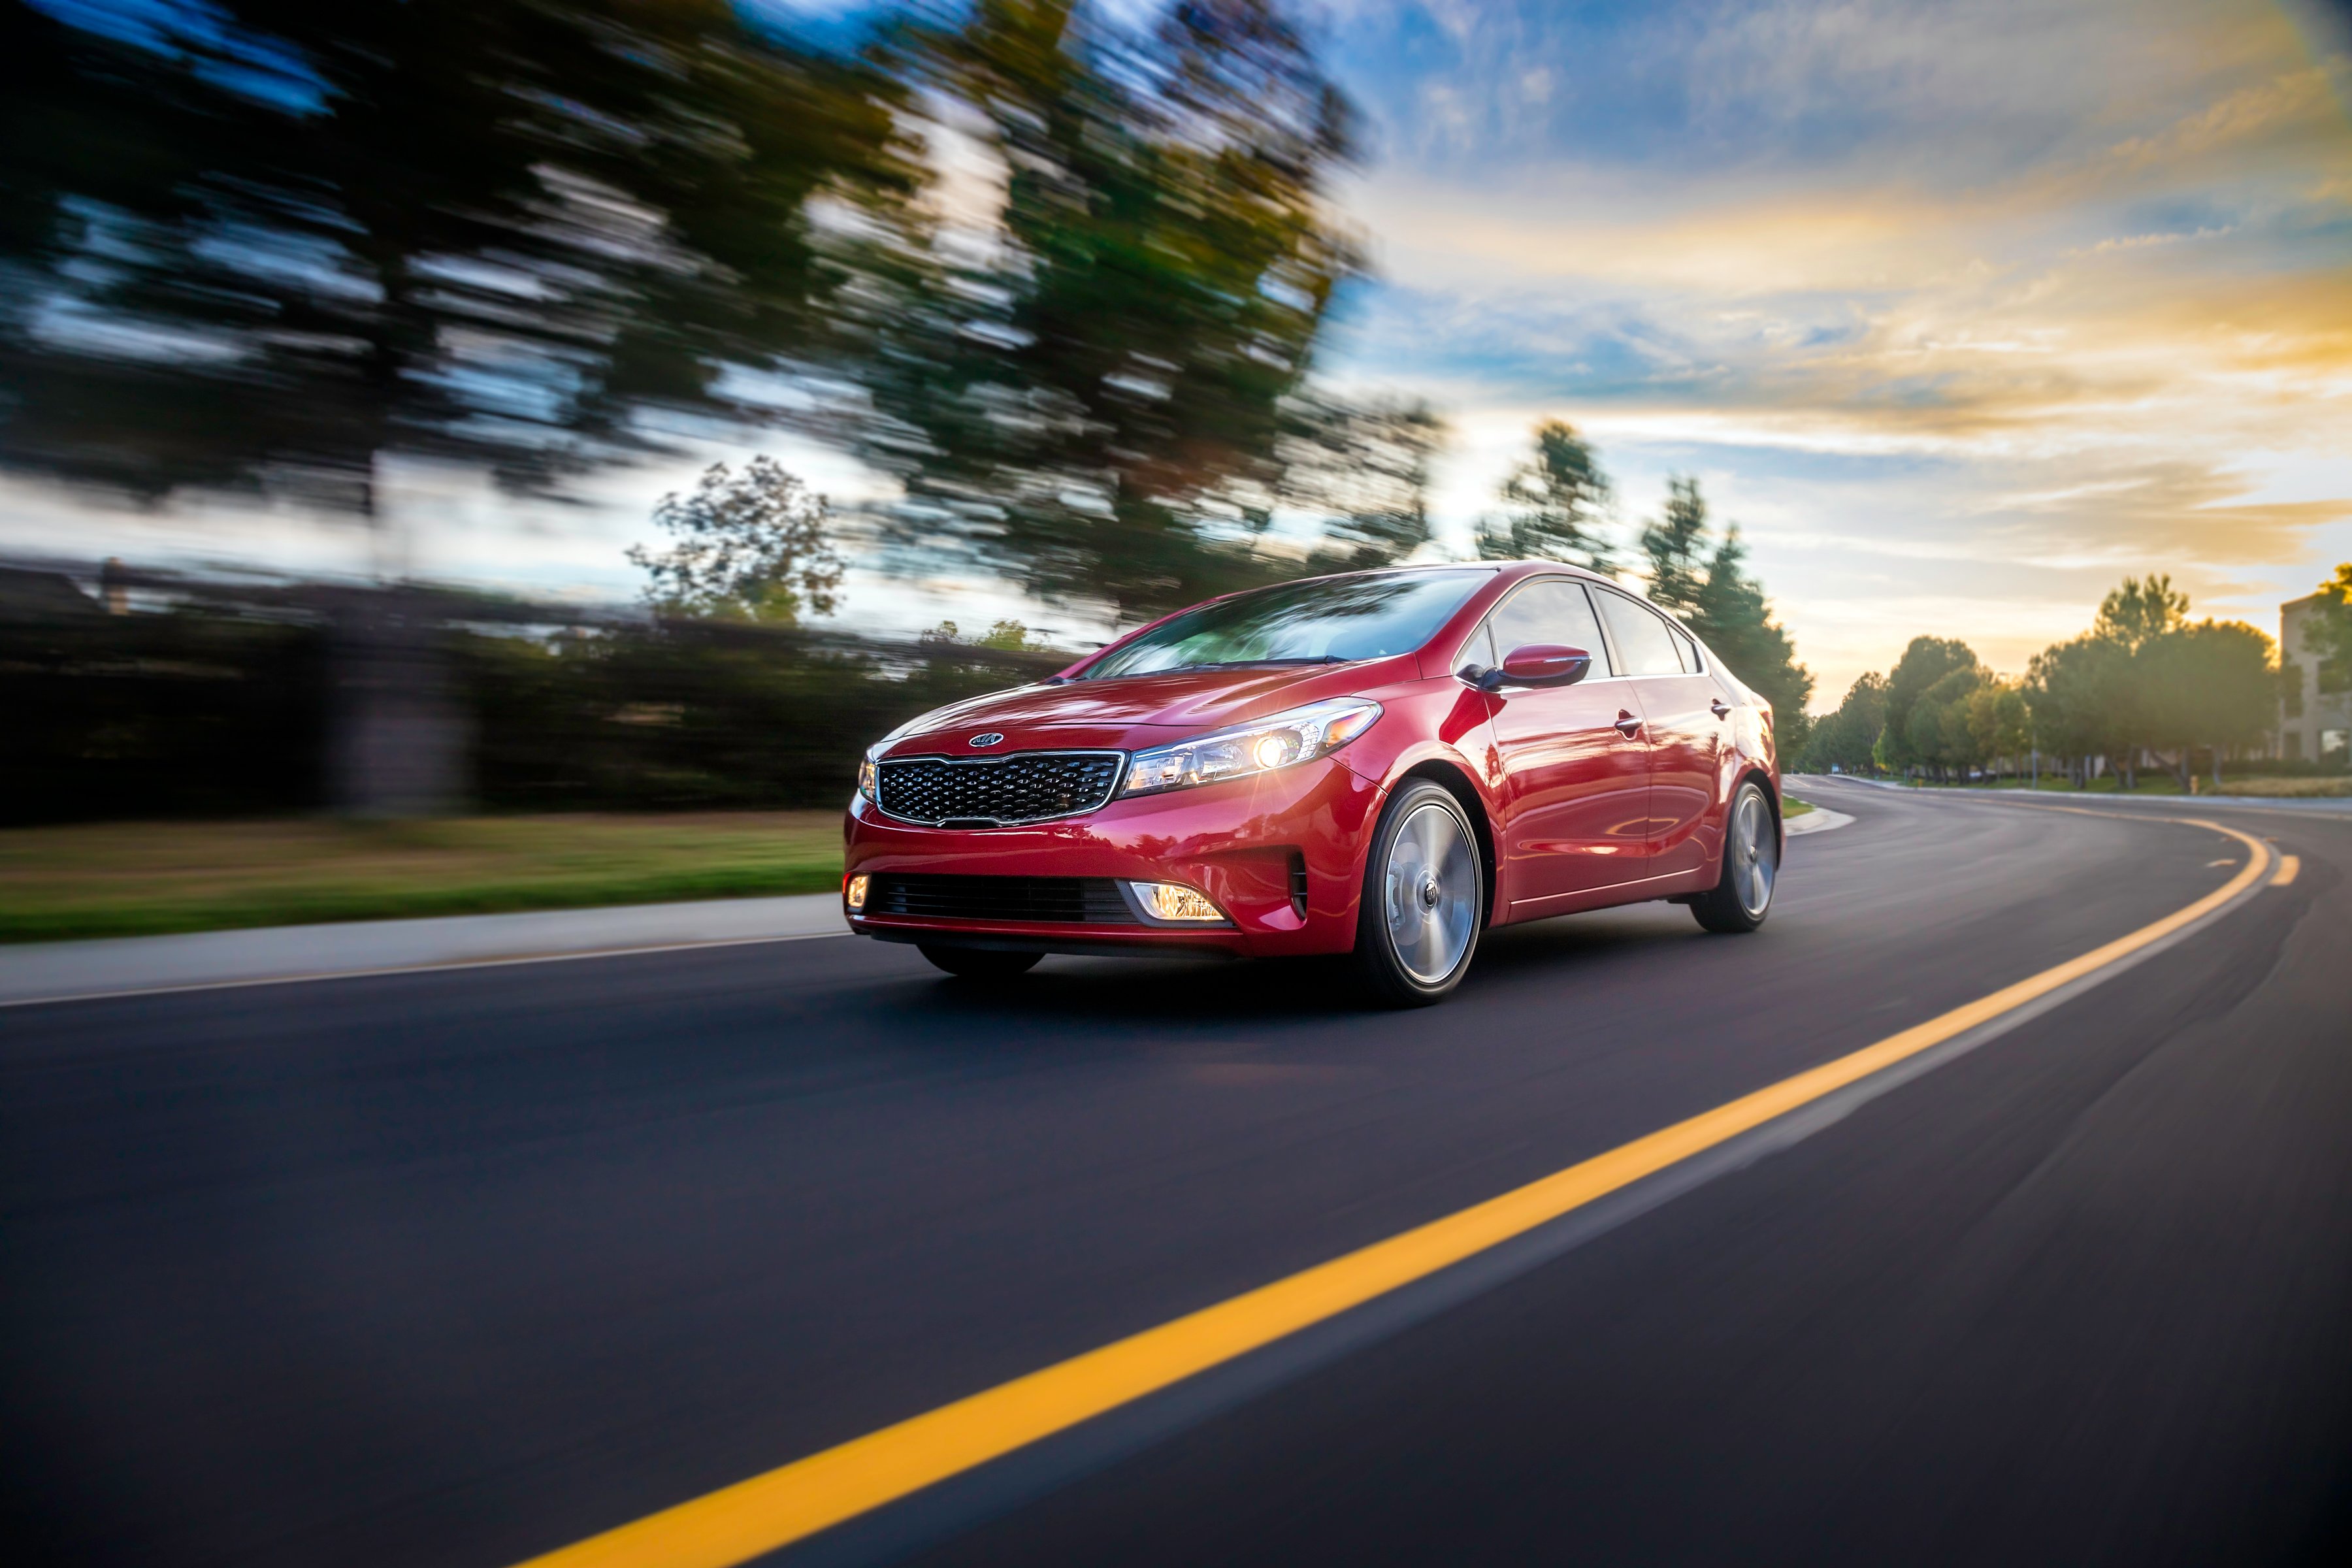 The 2017 Kia Forte Sedan boasts a new style and upgraded smart features.